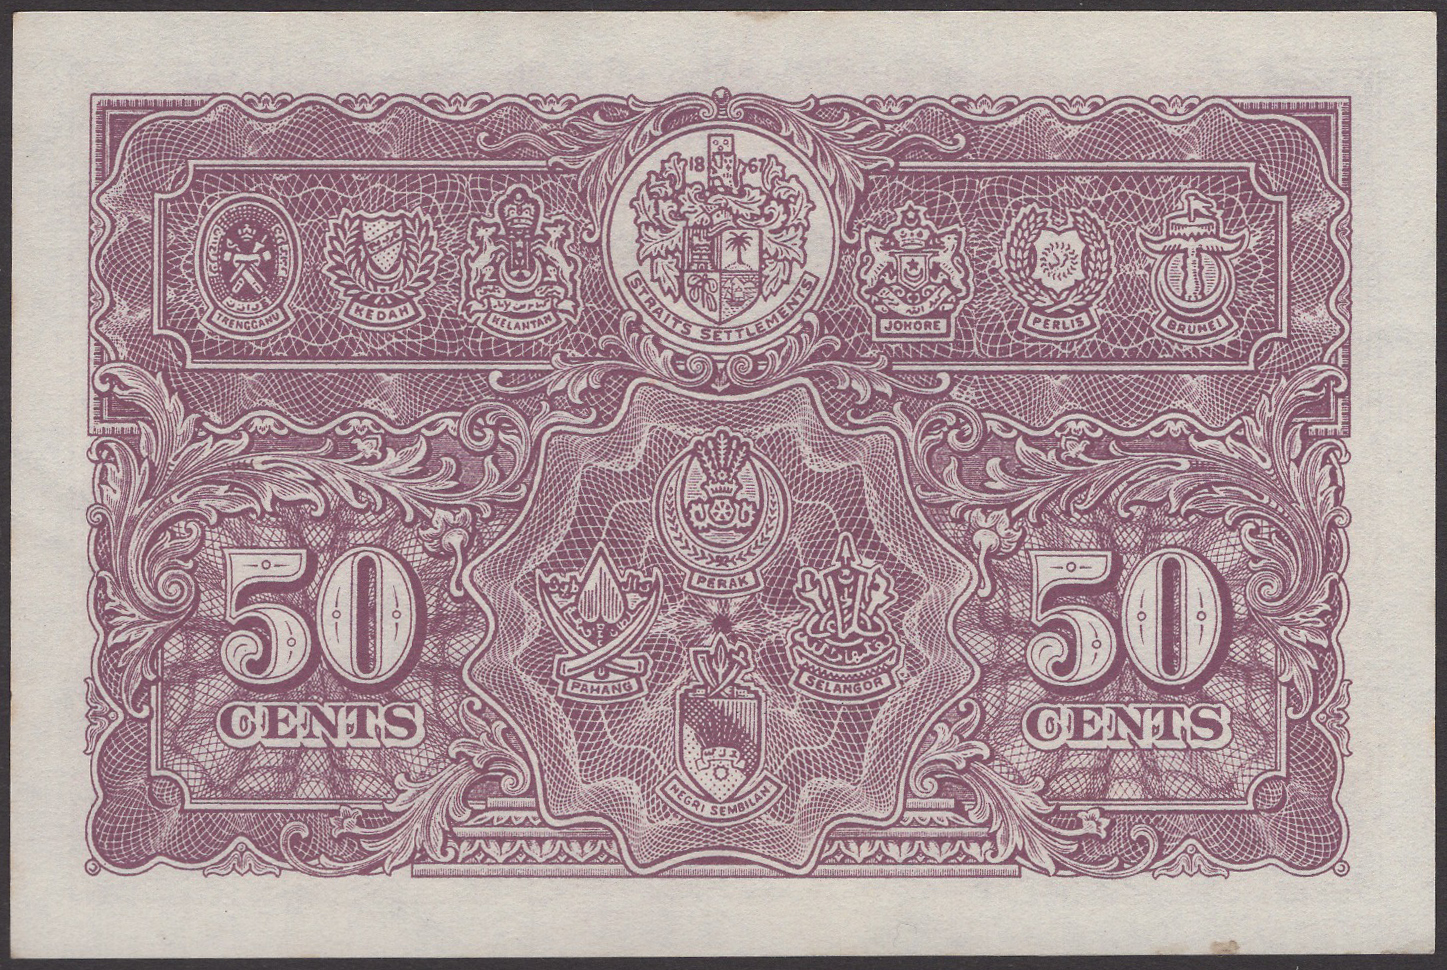 Board of Commissioners of Currency Malaya, 50 Cents, 1 July 1941, serial number A/25... - Bild 2 aus 2